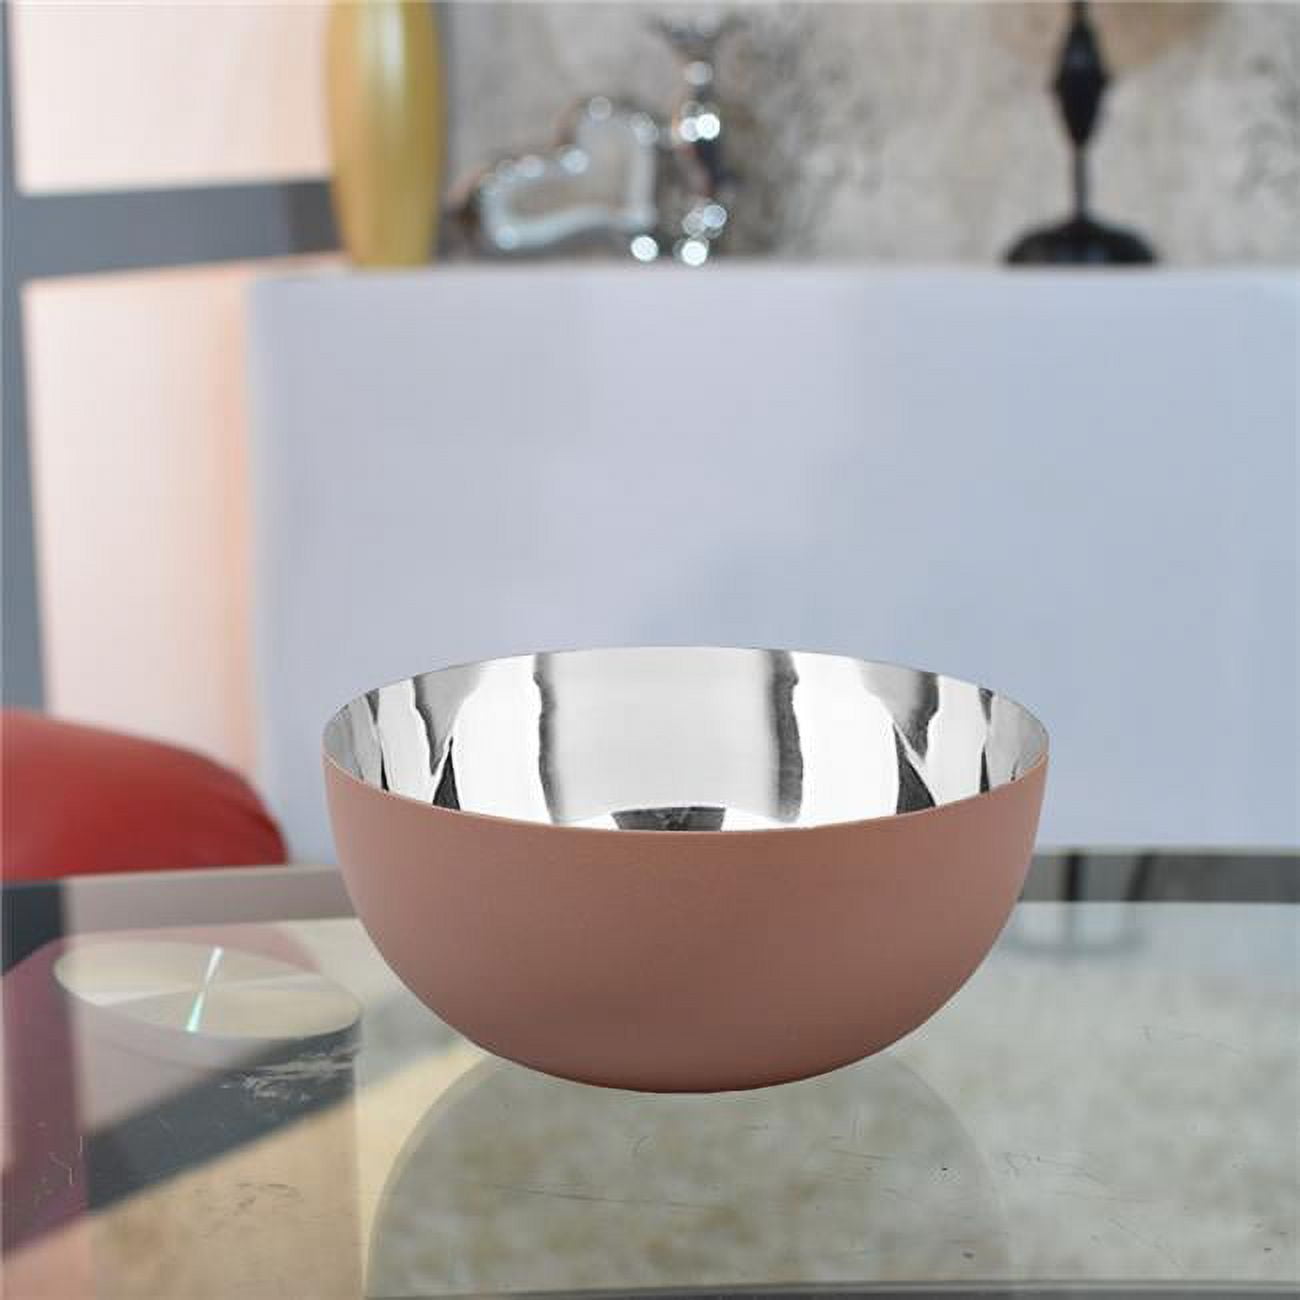 Picture of BBH Homes UBBBAOB328DSC2HS 15.5 x 15.5 x 7 cm Handmade Decorative Stainless Steel Bowls, Pearl White